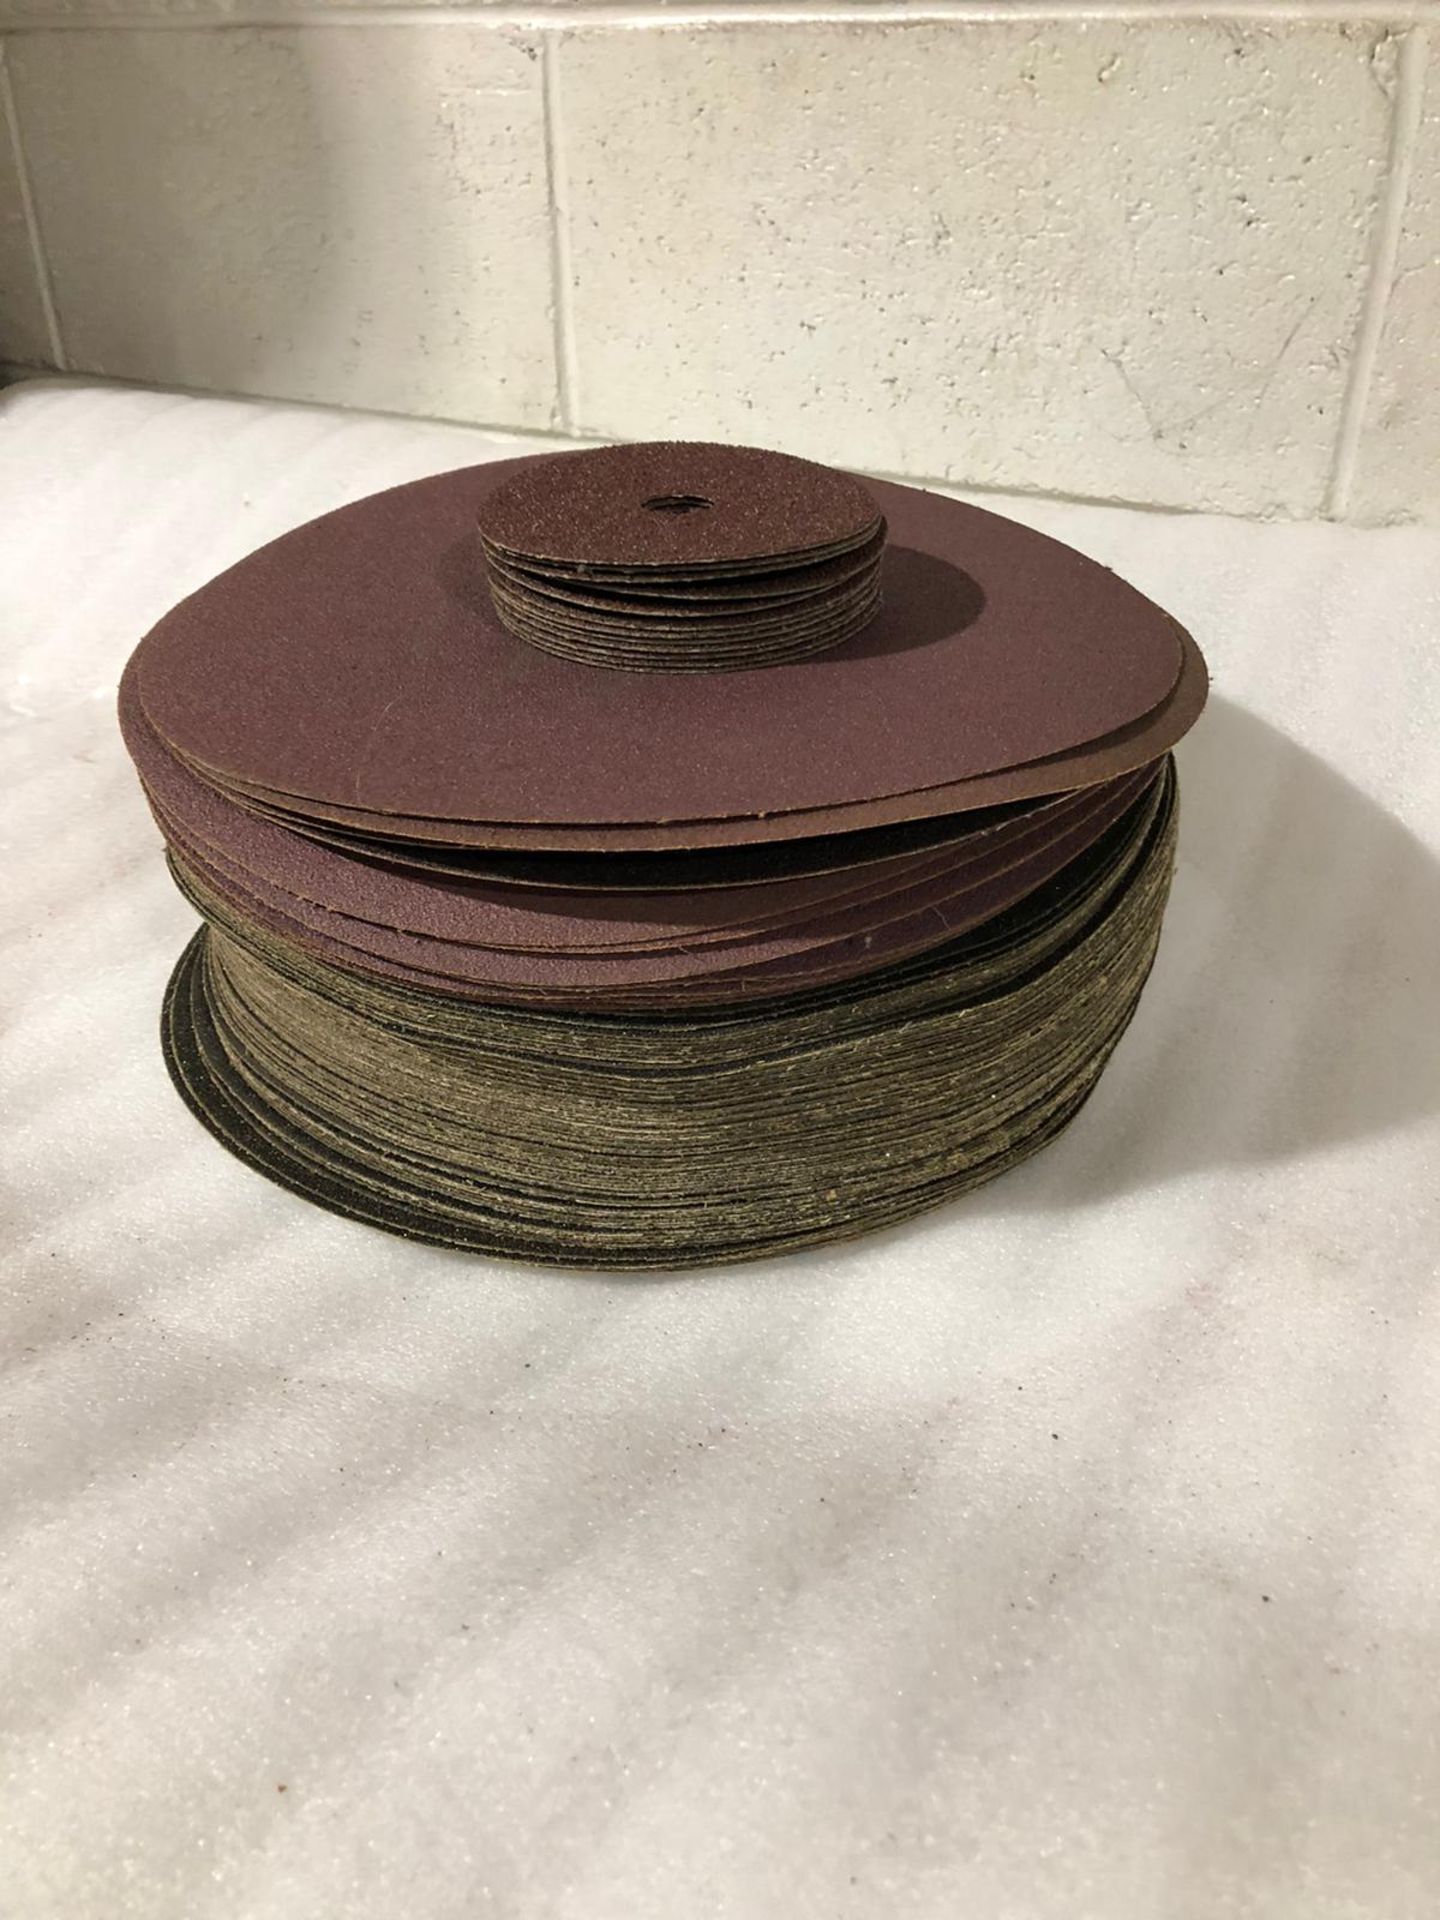 Lot of Approx 50 (50 units) Sanding Discs